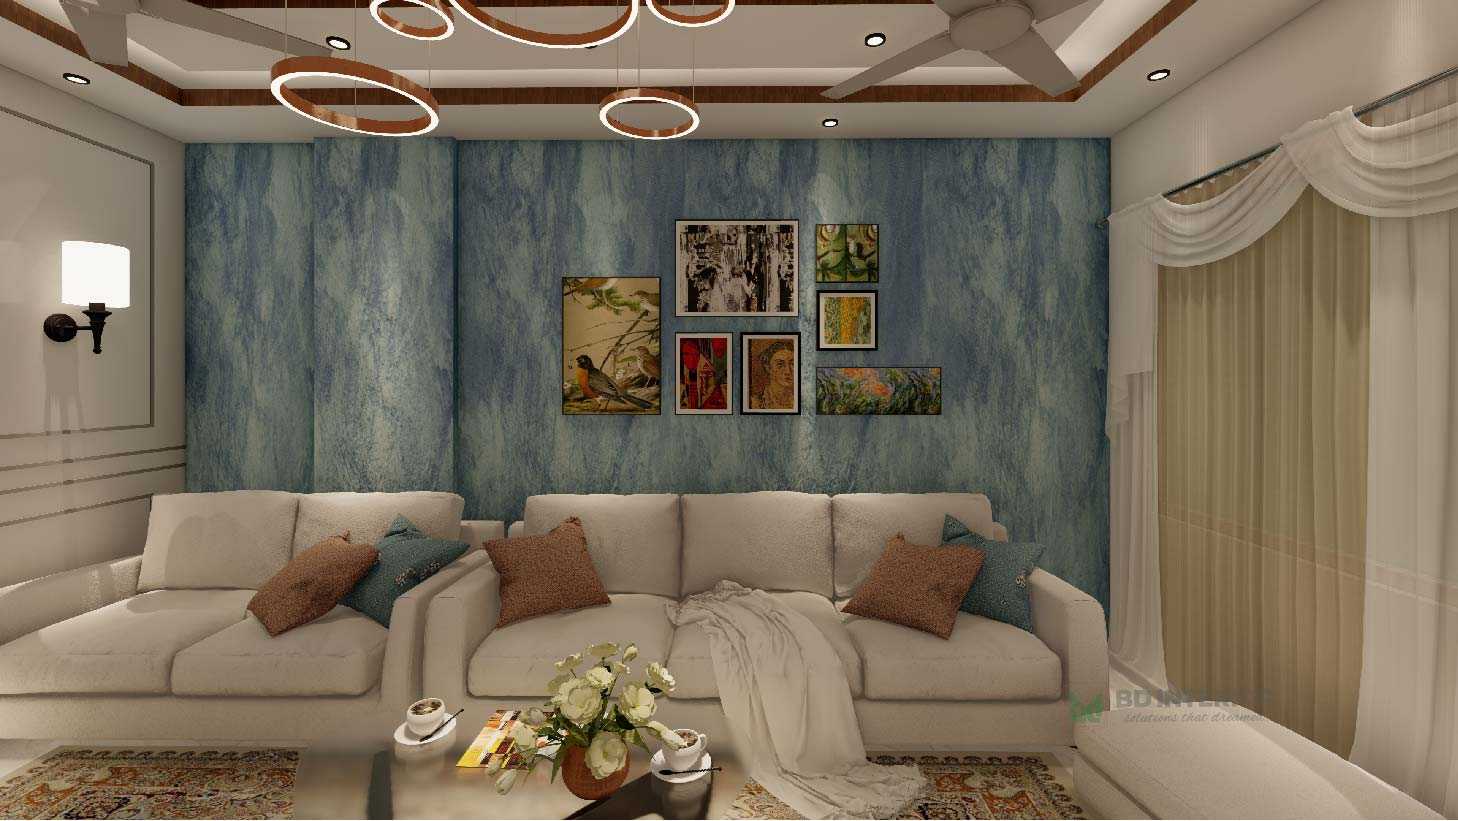 Living room interior design at low cost